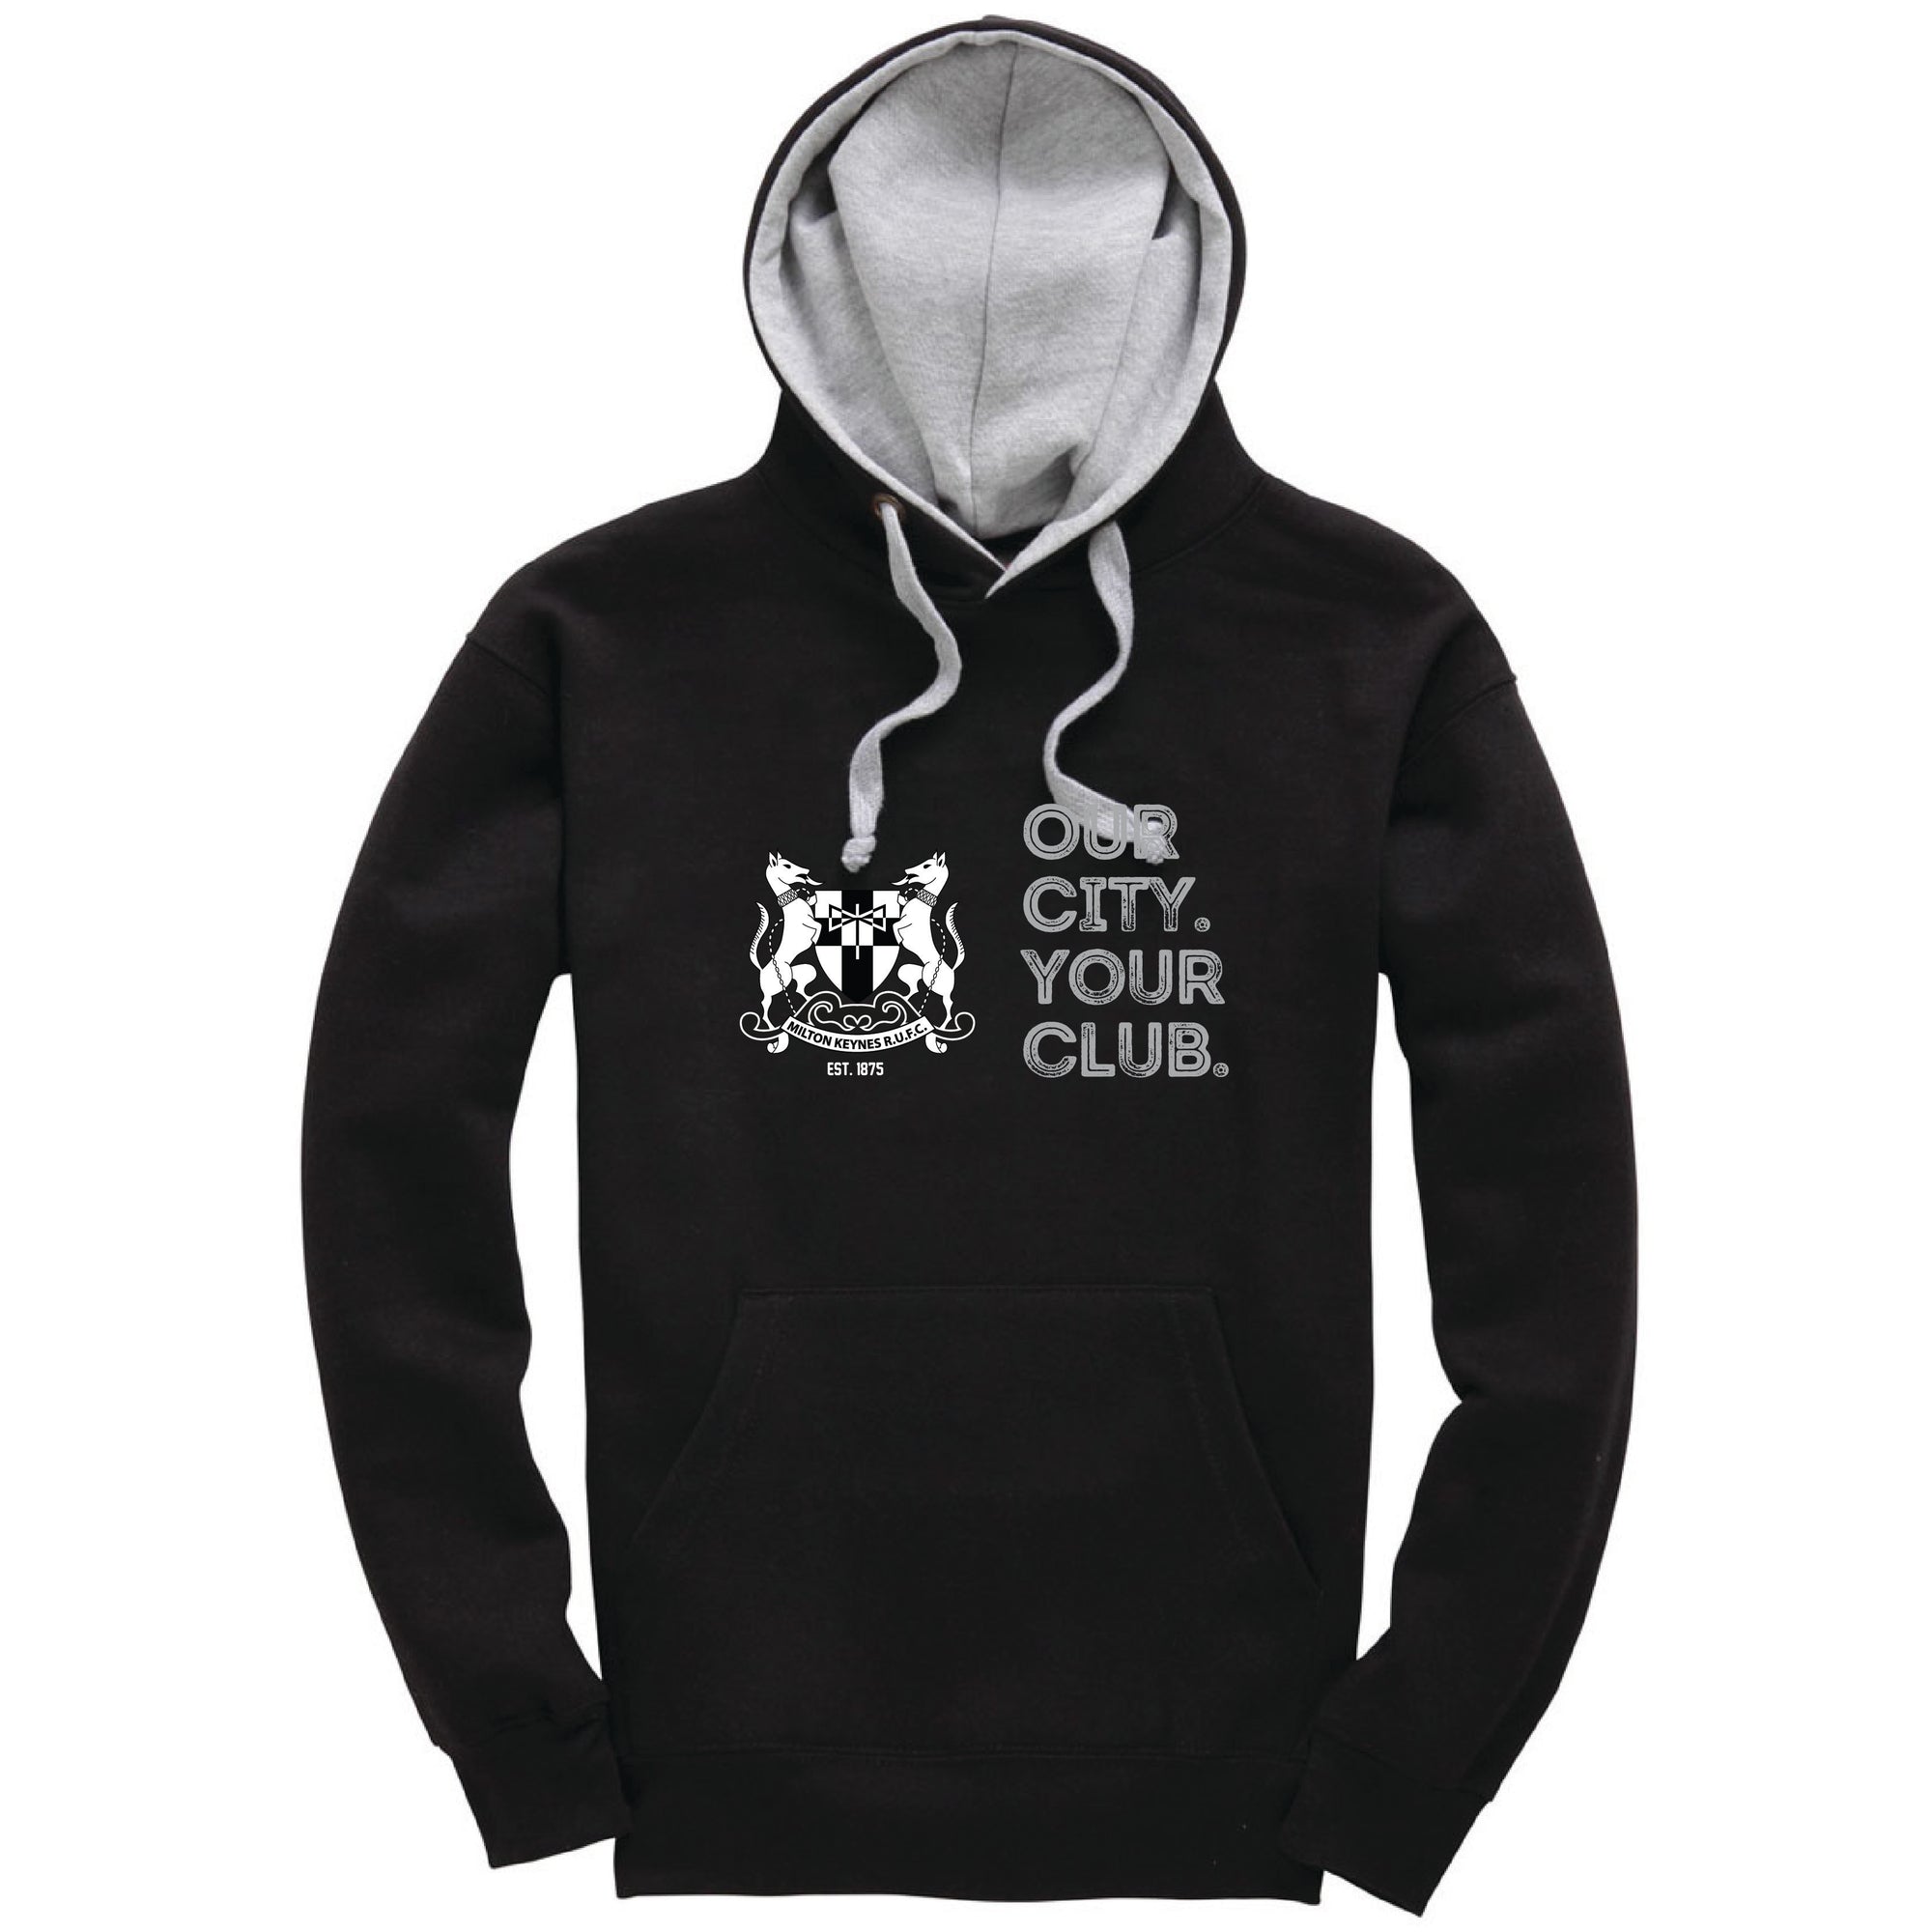 MKRUFC Supporters 2 Tone Hoodie "Our Club" - Black / Grey